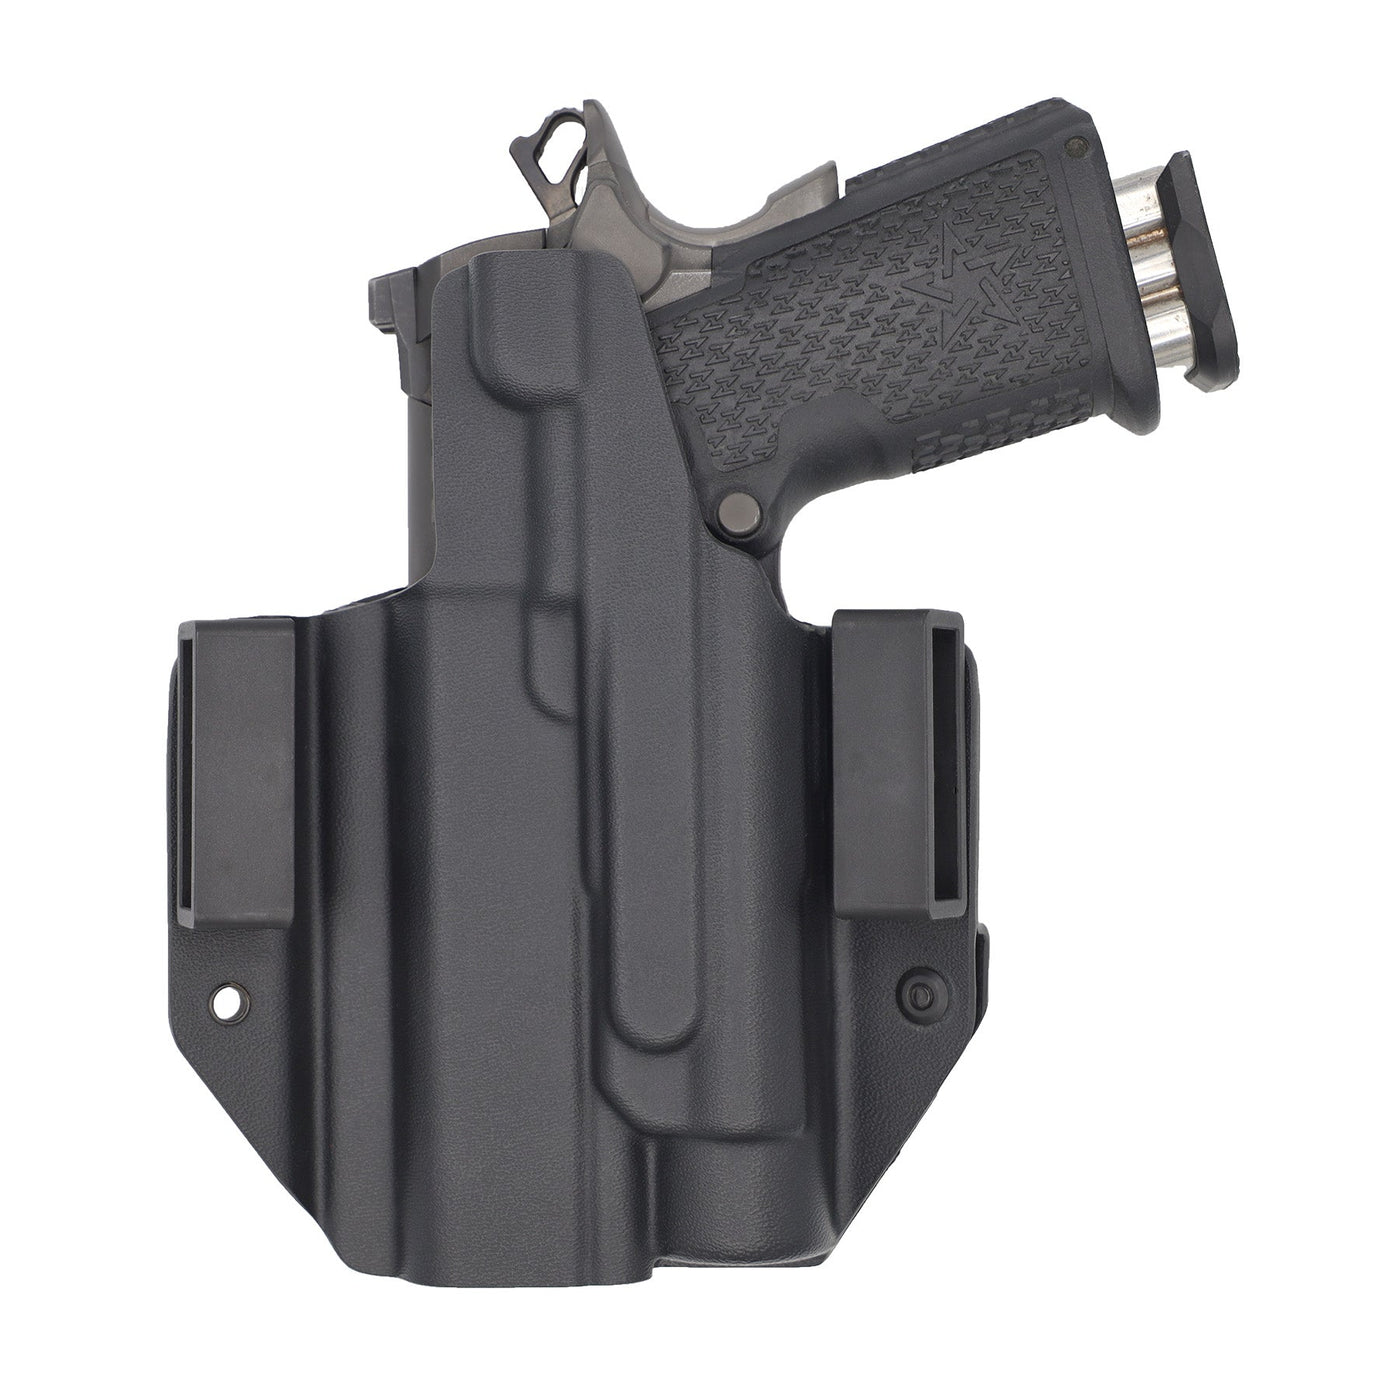 C&G Holsters Quickship OWB Tactical 1911 DS Prodigy Streamlight TLR1 in holstered position back view